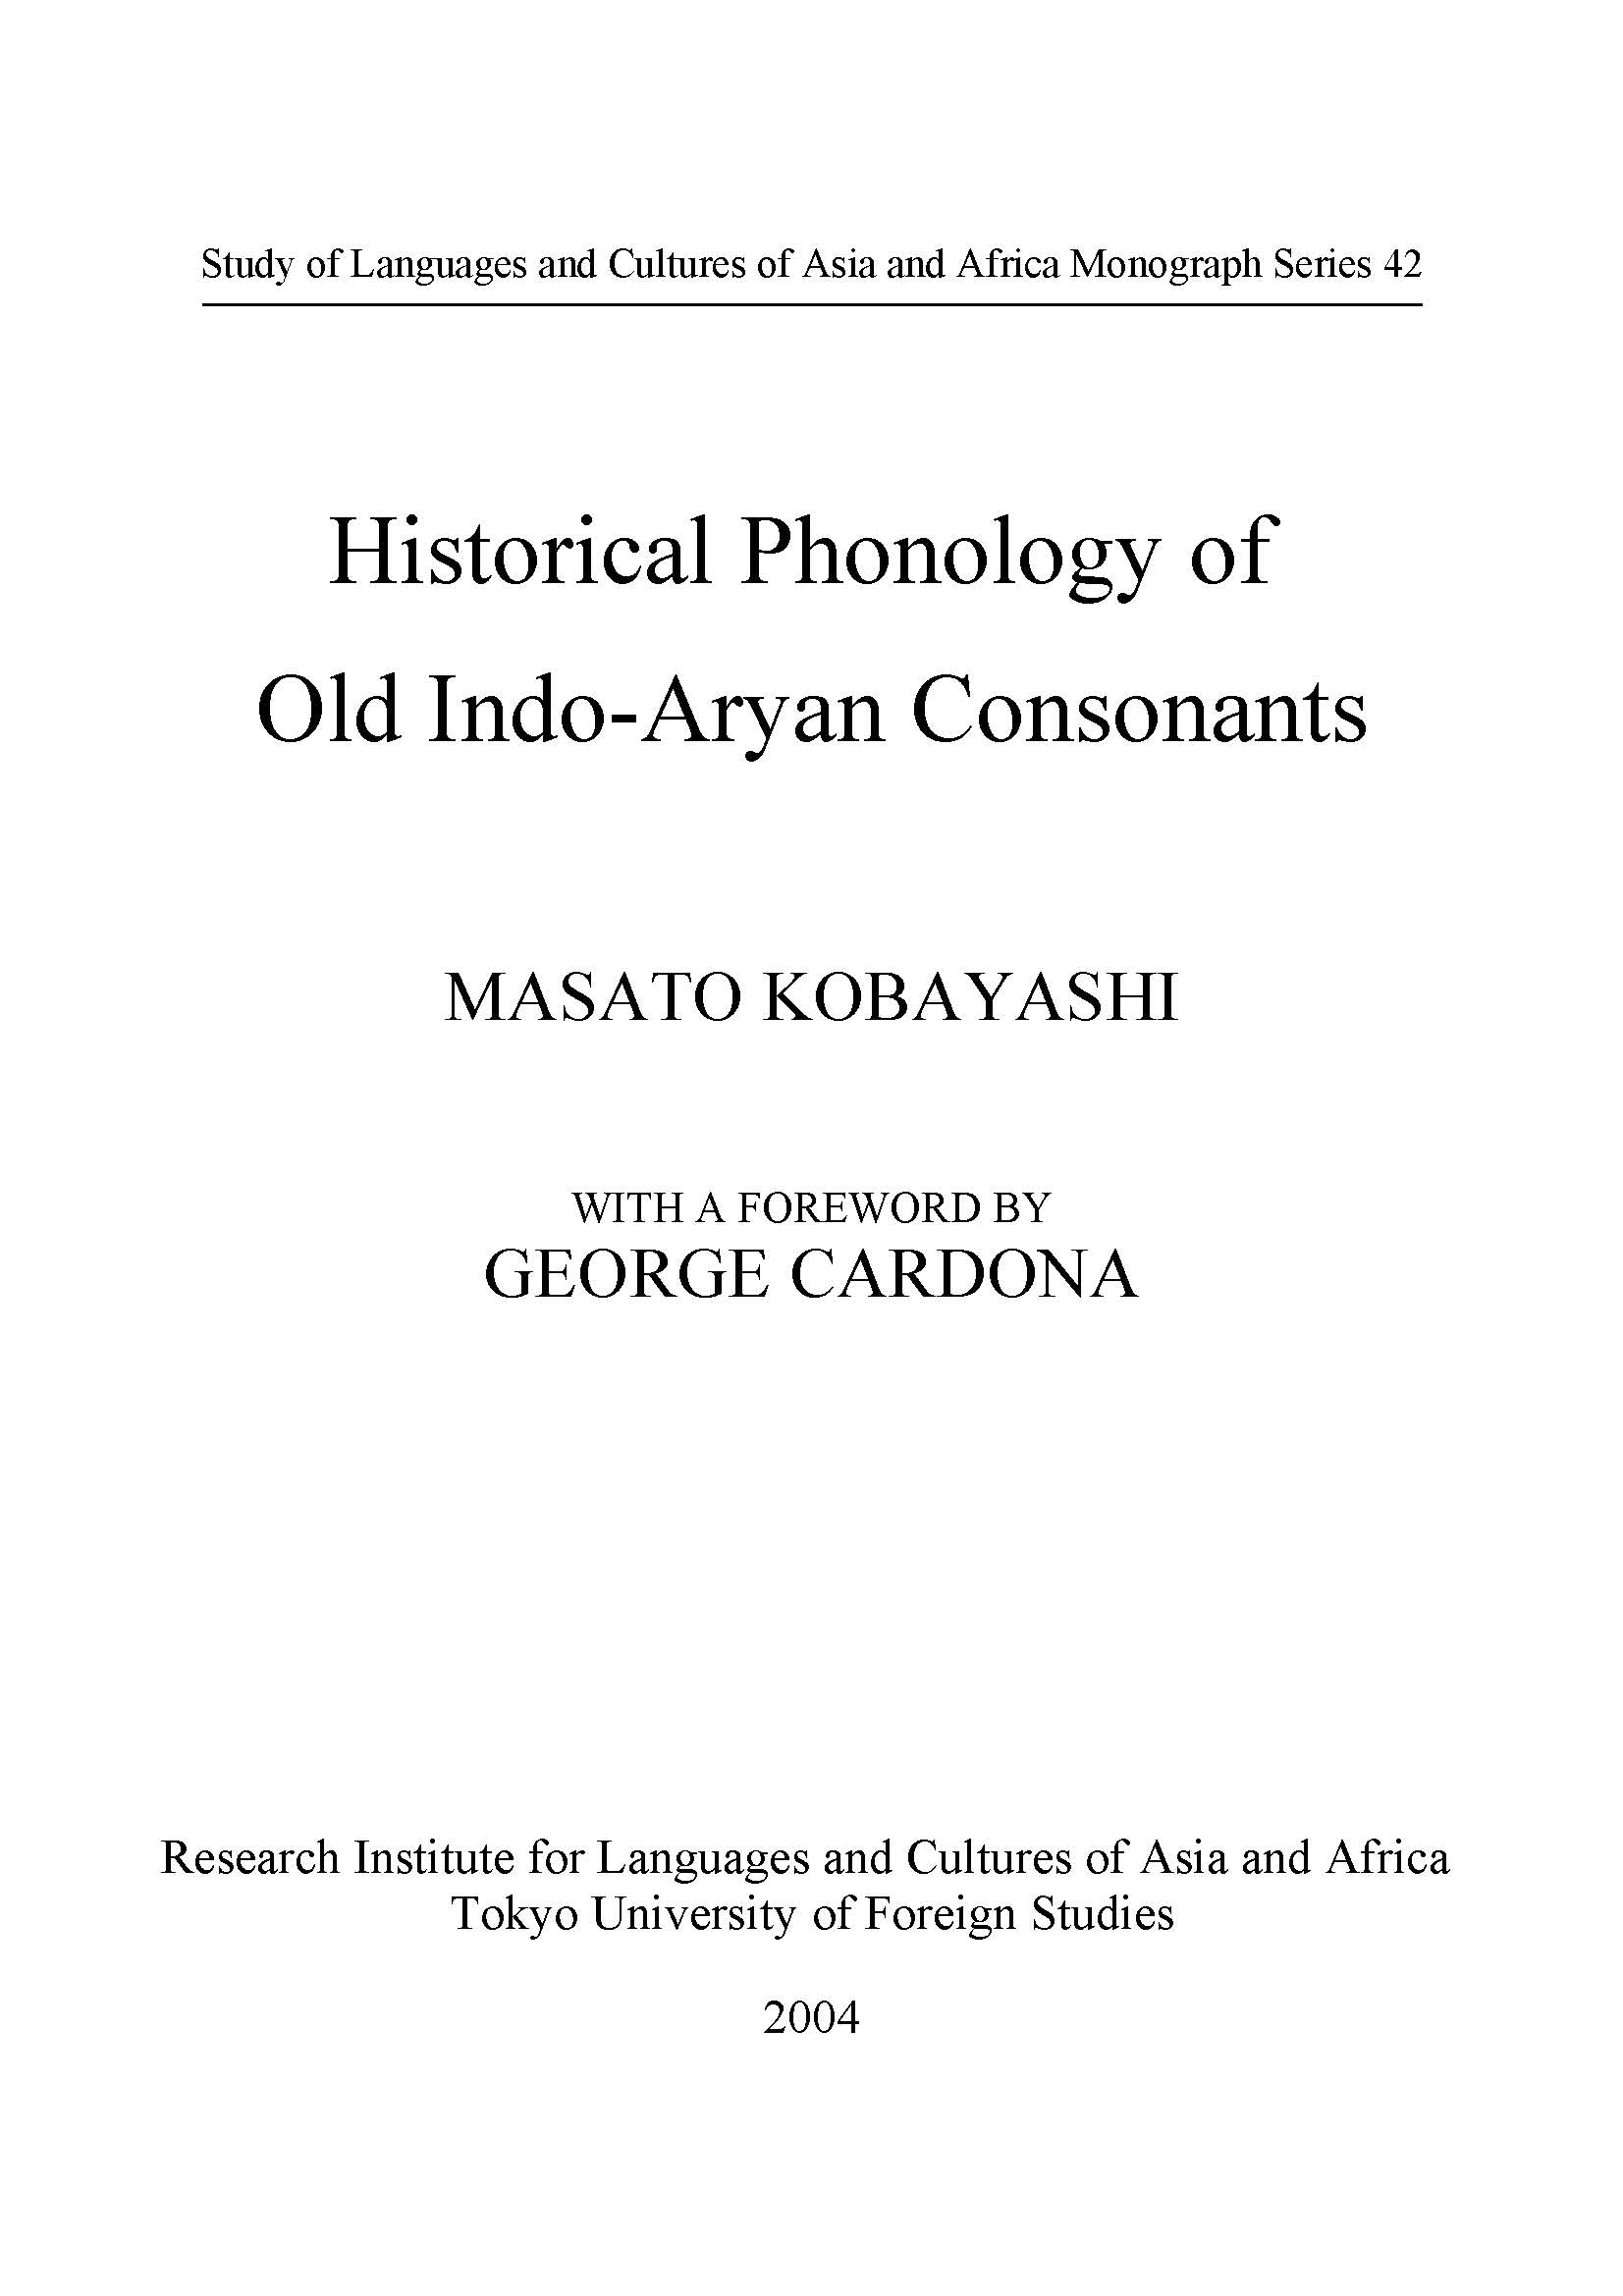 Historical Phonology of Old Indo-Aryan Consonants